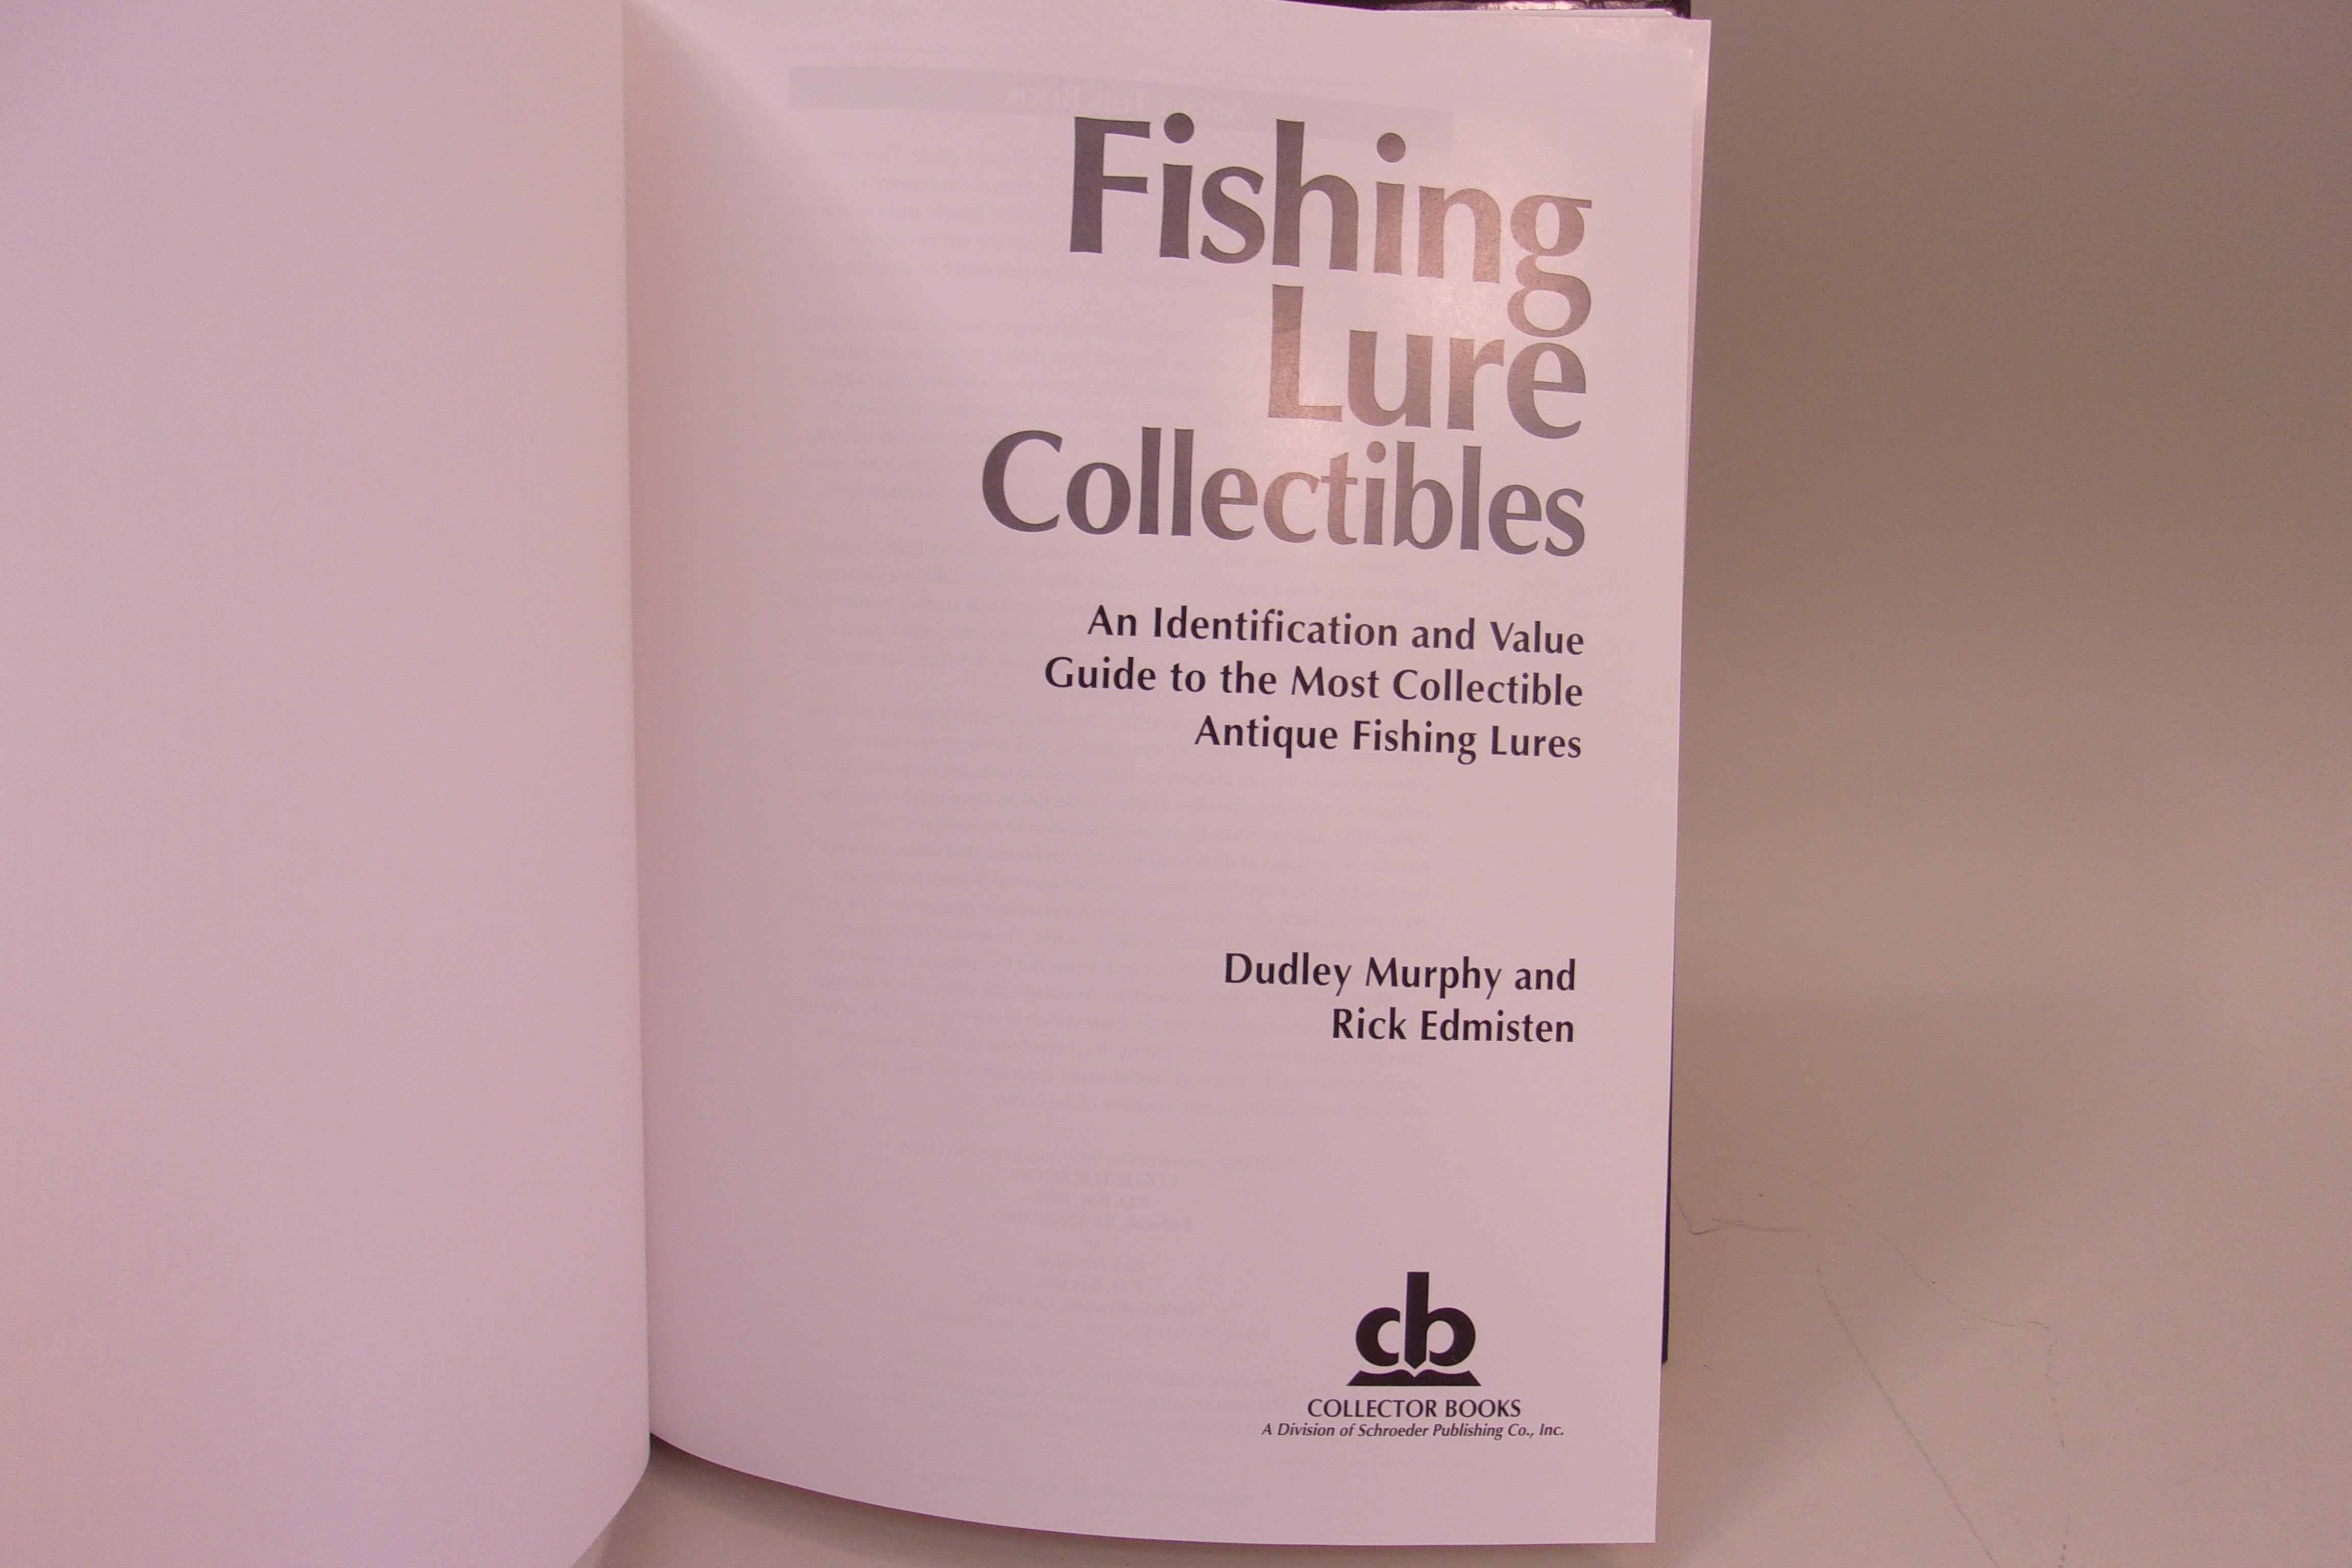 Fishing Lure Collectibles, Vol. 1: An Identification and Value